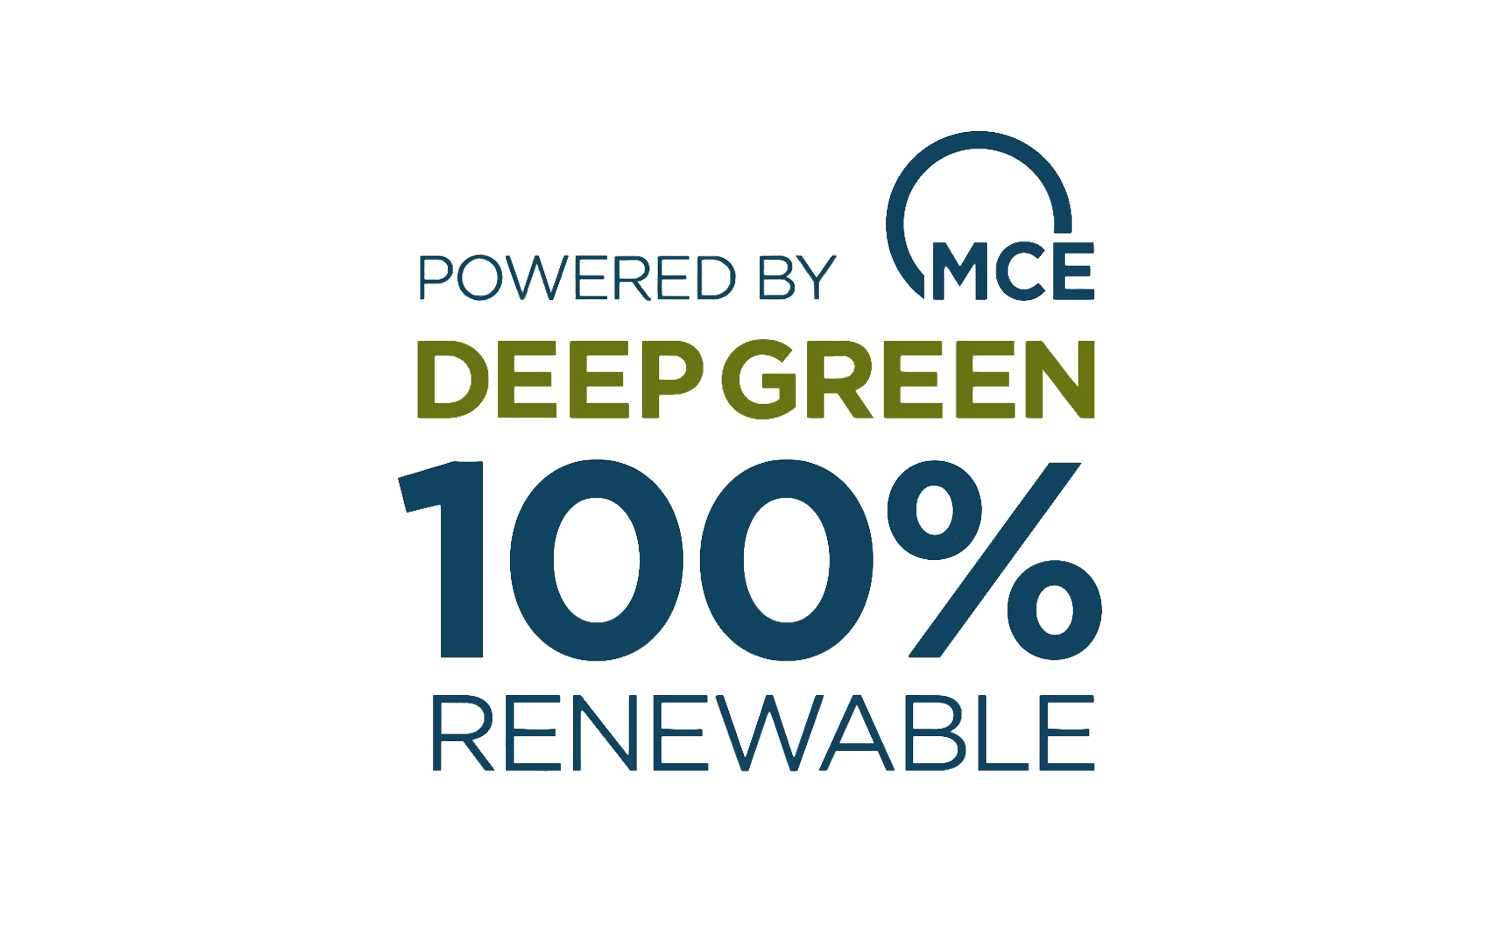 Powered by MCE Deep Green 100% Renewable